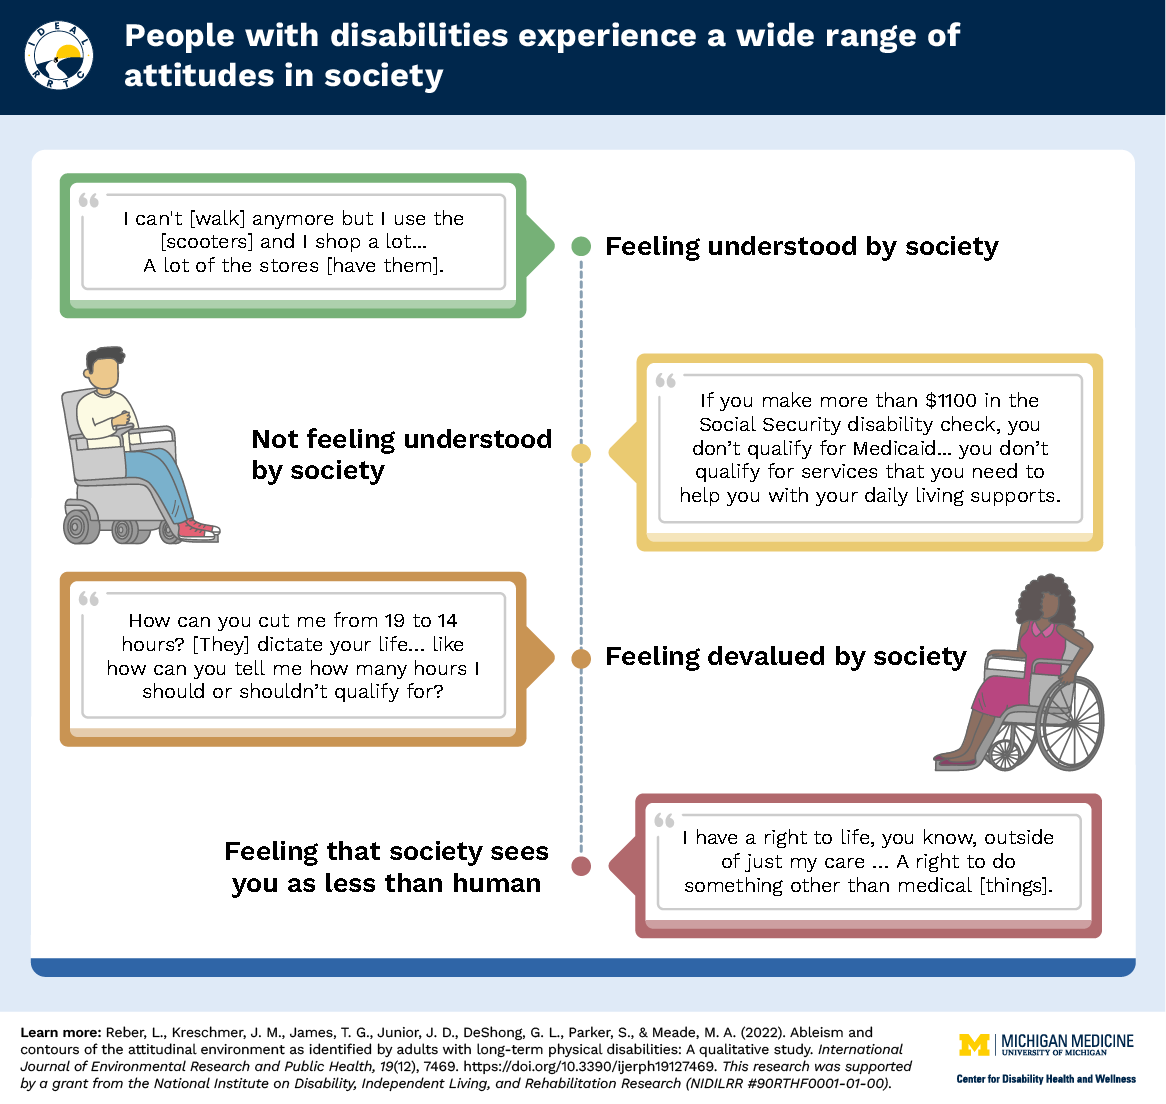 People with disabilities experience a range of attitudes